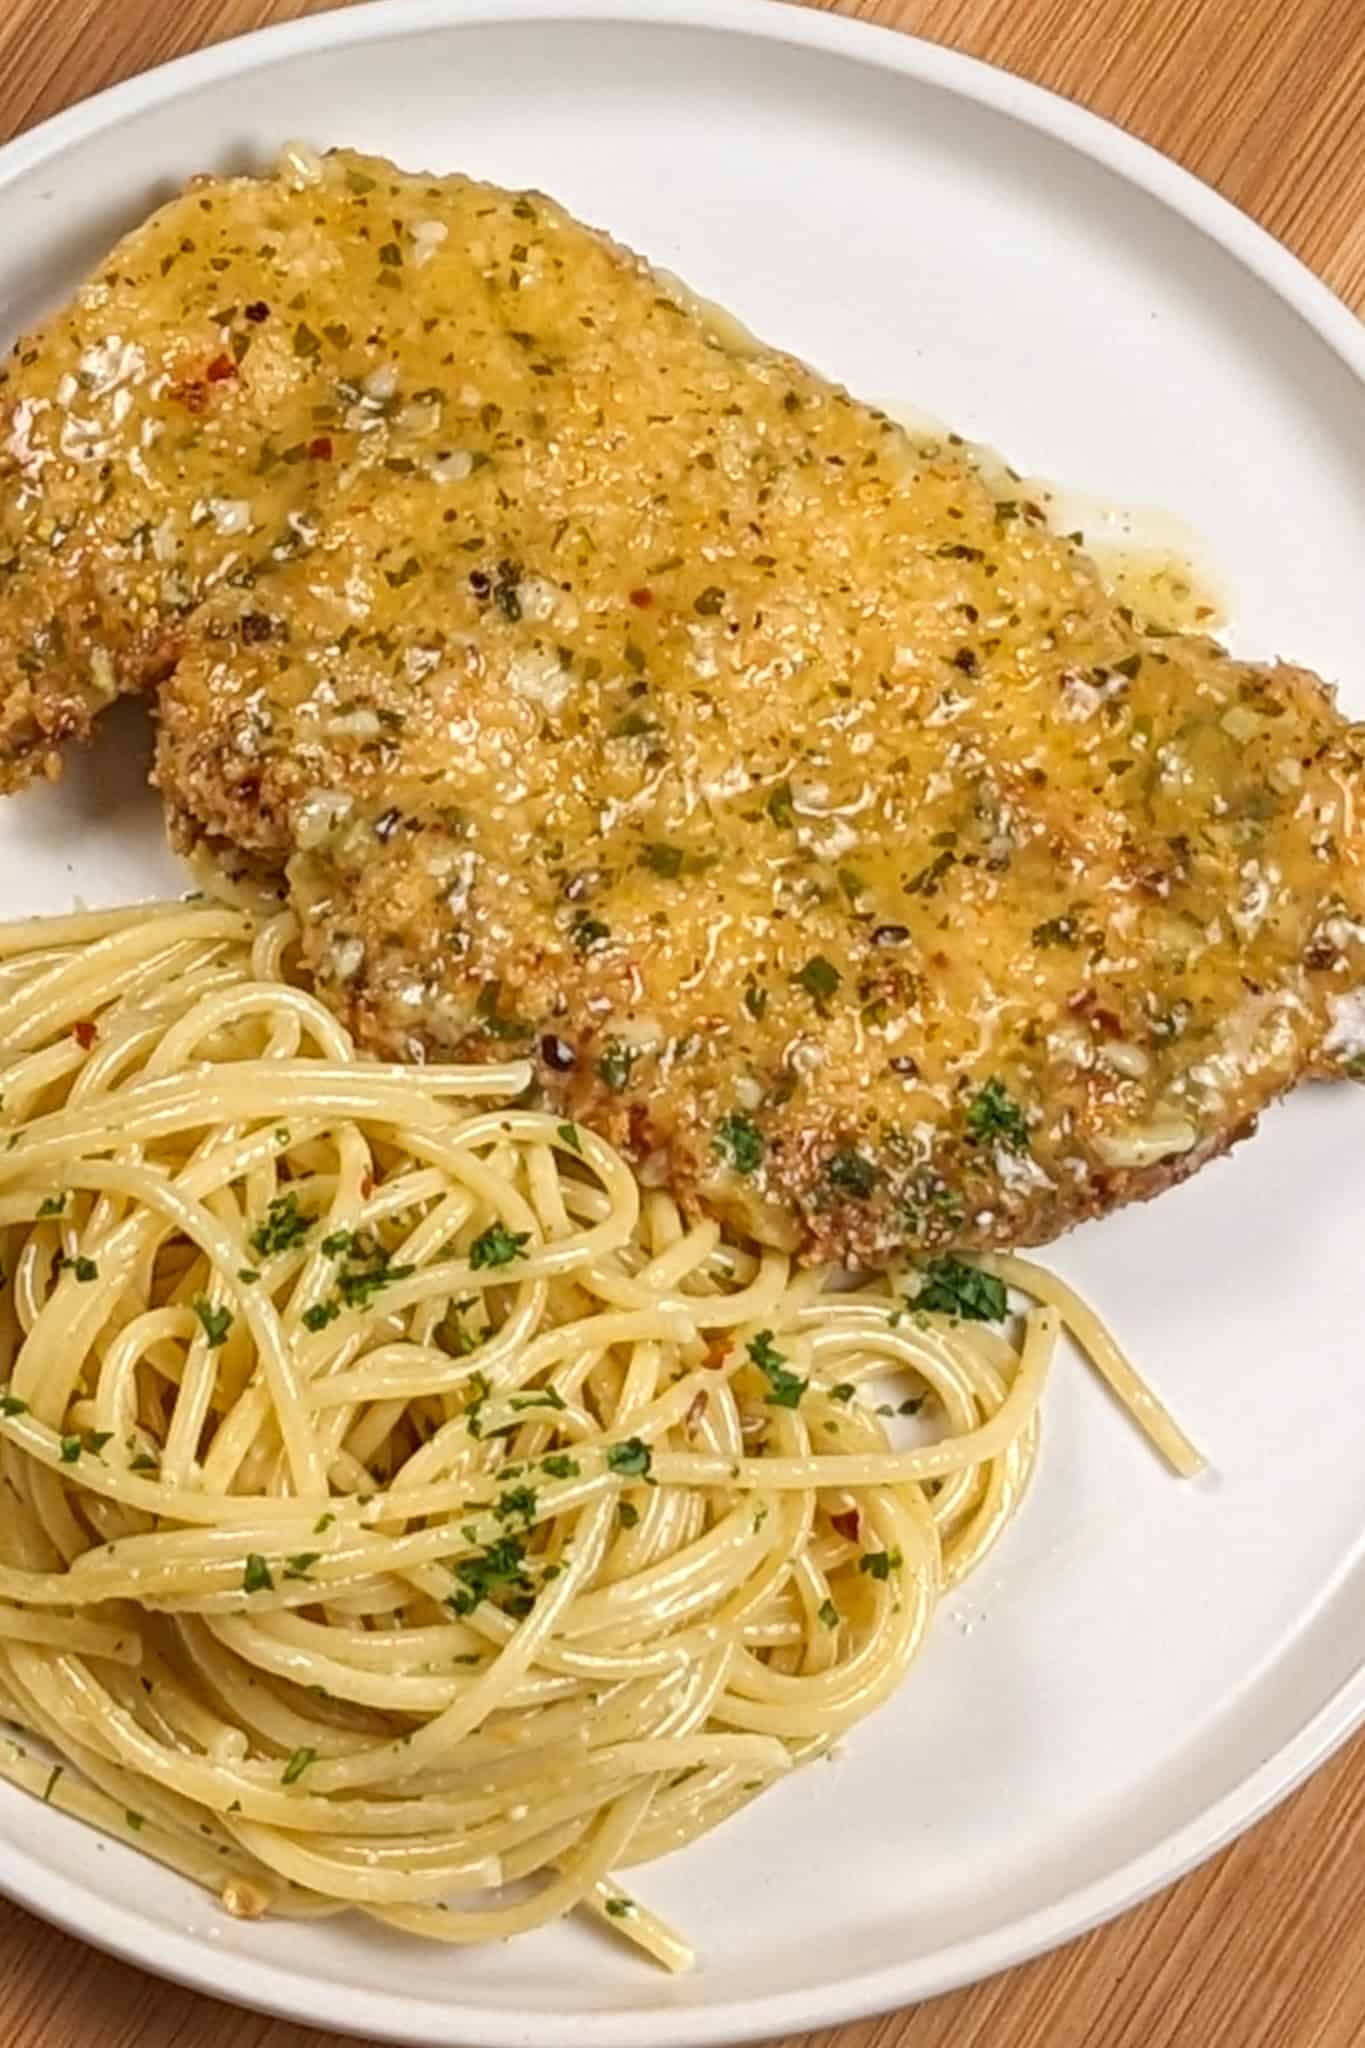 wet lemon pepper chicken cutlet on a white round plate next to olive oil and grated cheese tossed spaghetti dusted with chopped fresh parsley